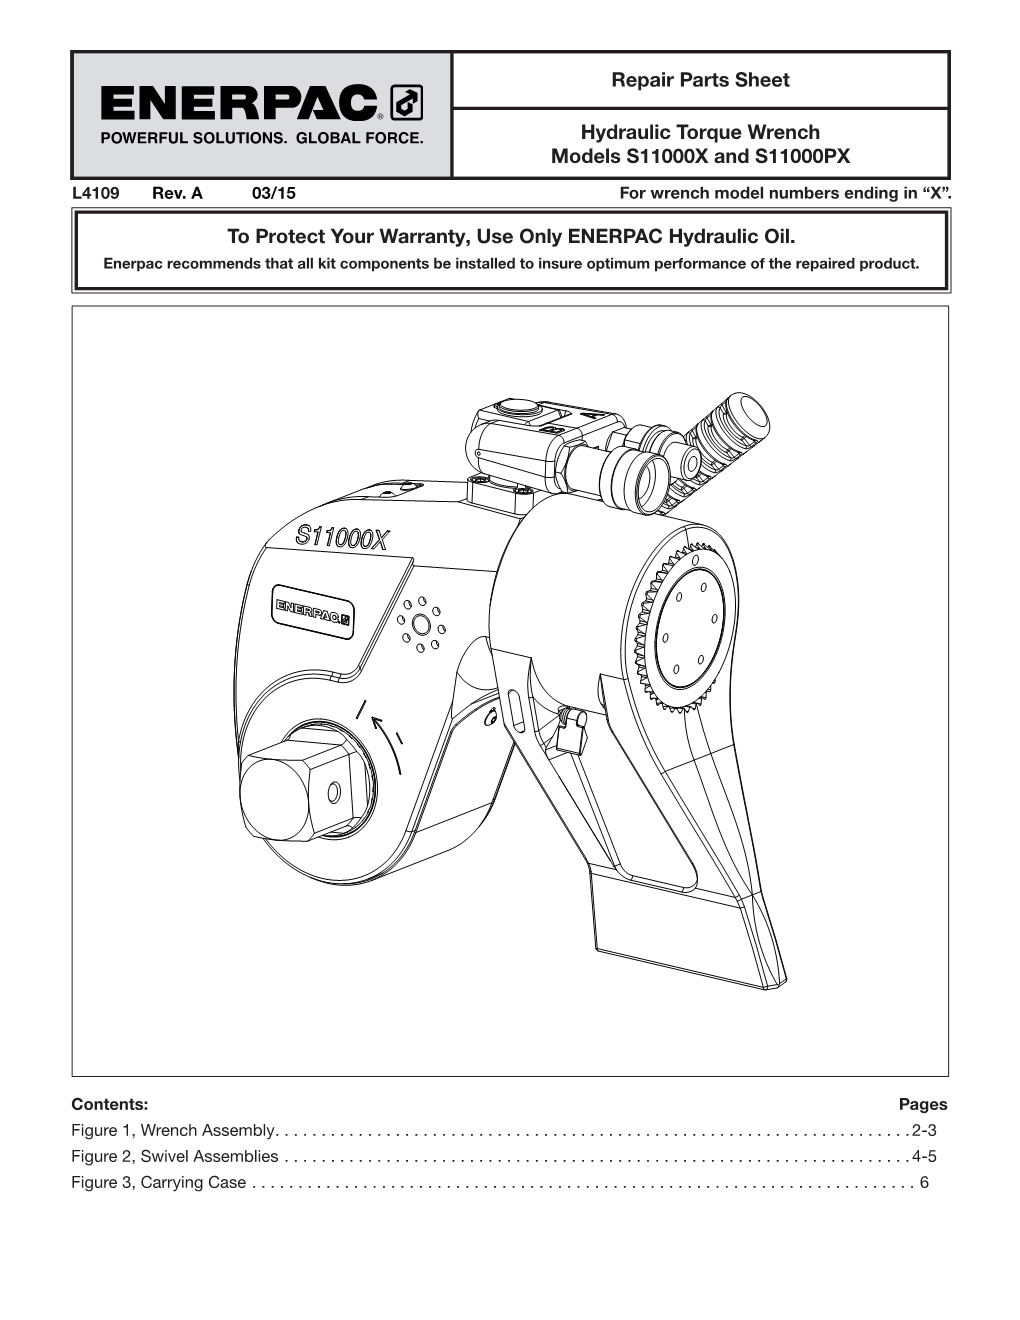 Repair Parts Sheet Hydraulic Torque Wrench Models S11000X